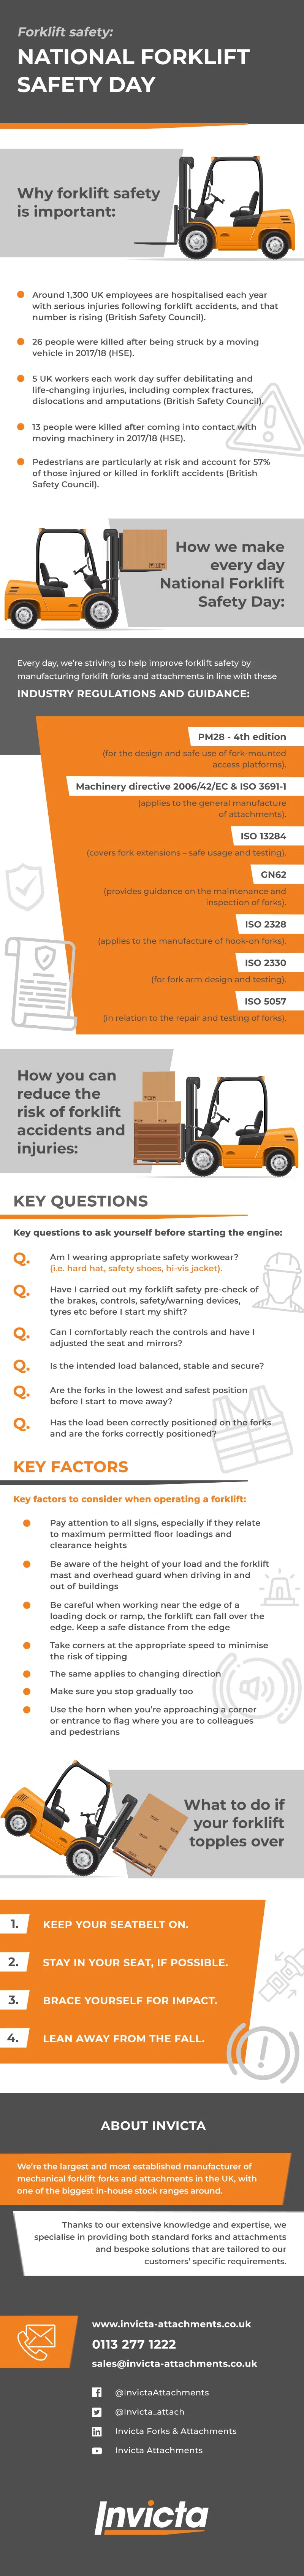 Invicta-Infographic-Forklift-Safety